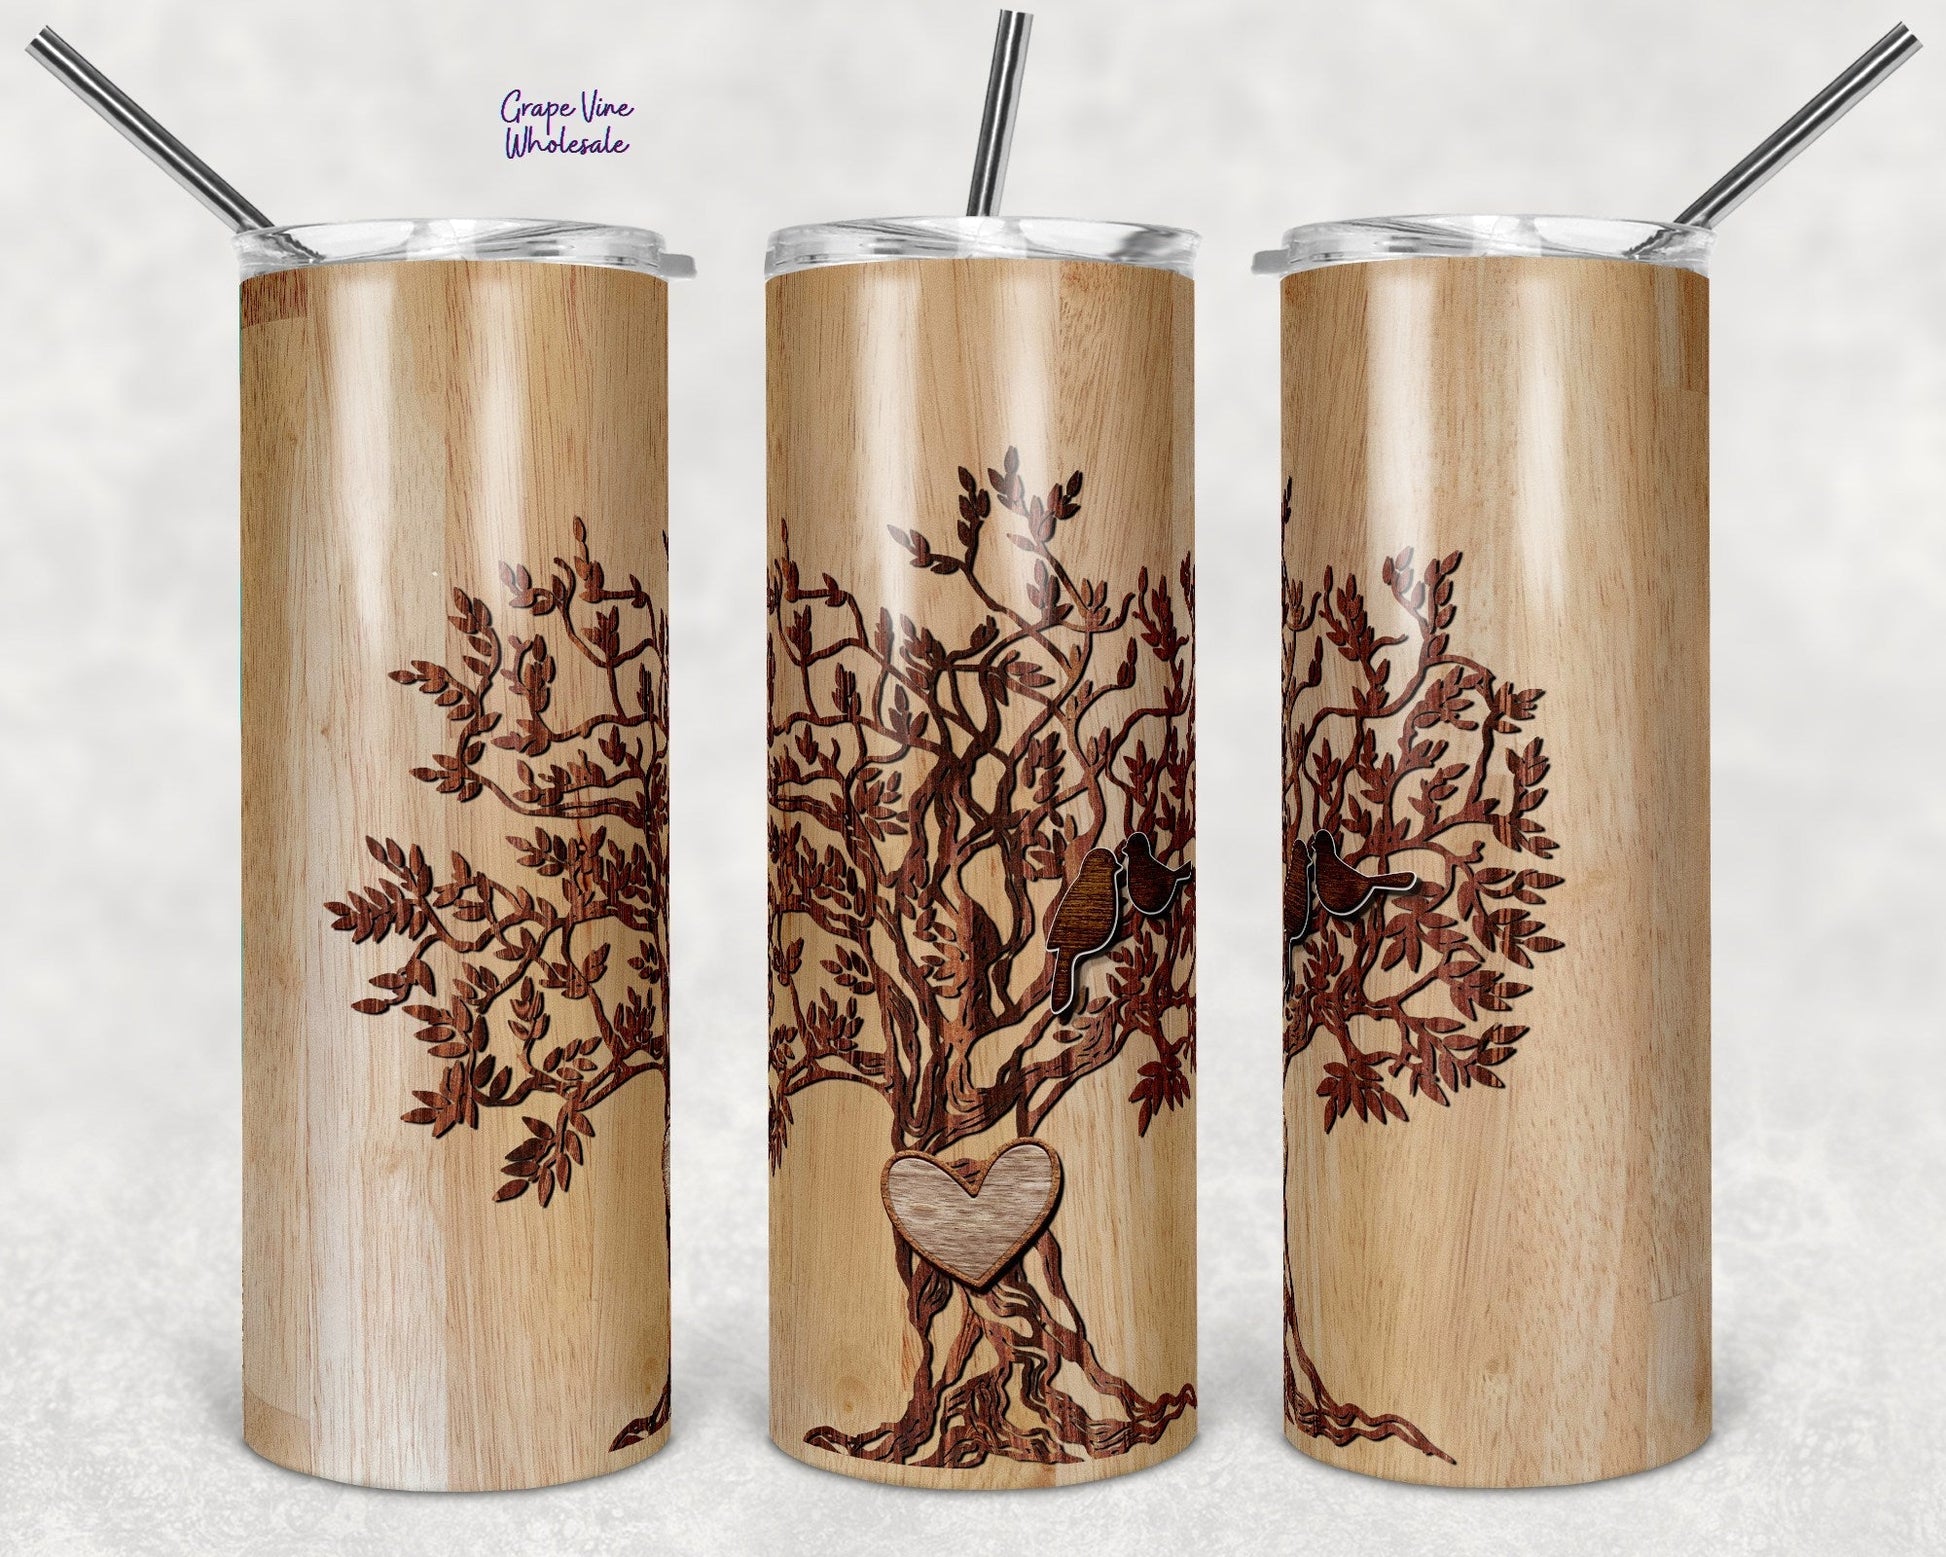 Find Me With The Birds & Trees 20oz Skinny Tumbler Grape Vine Wholesale